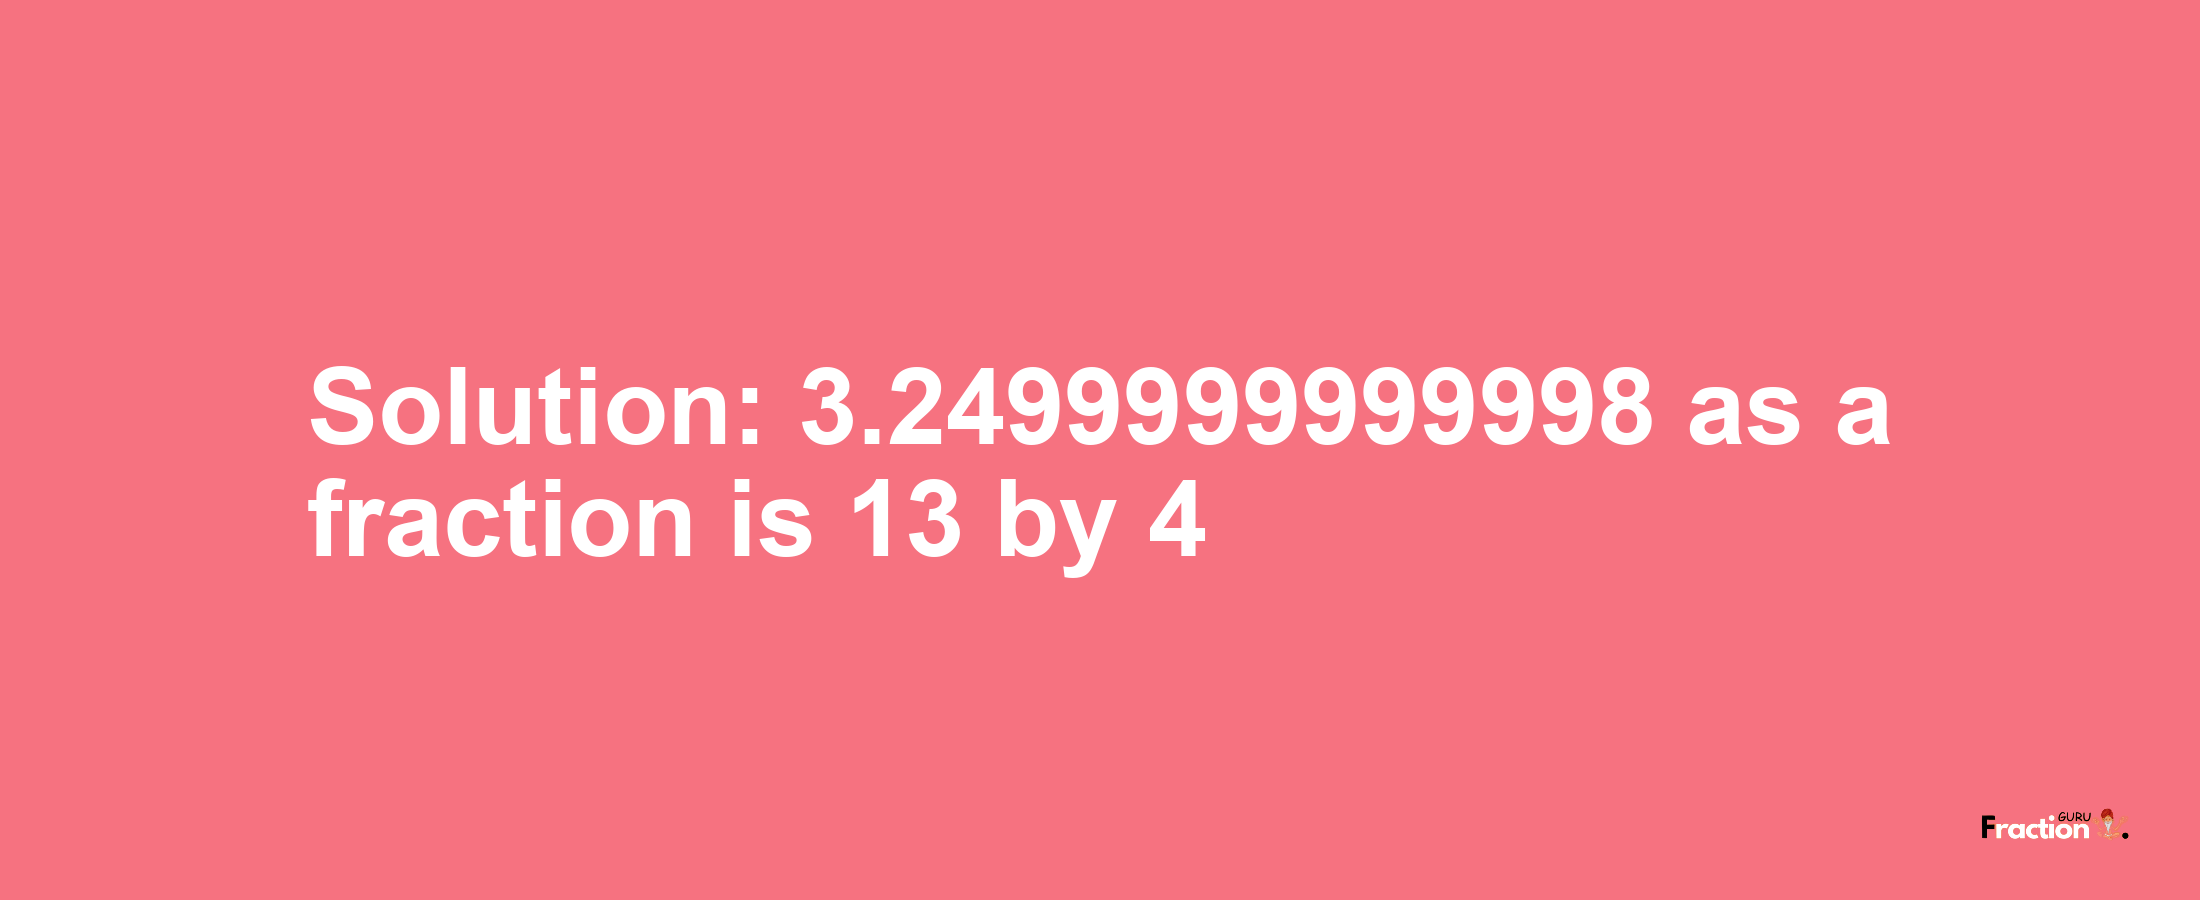 Solution:3.2499999999998 as a fraction is 13/4